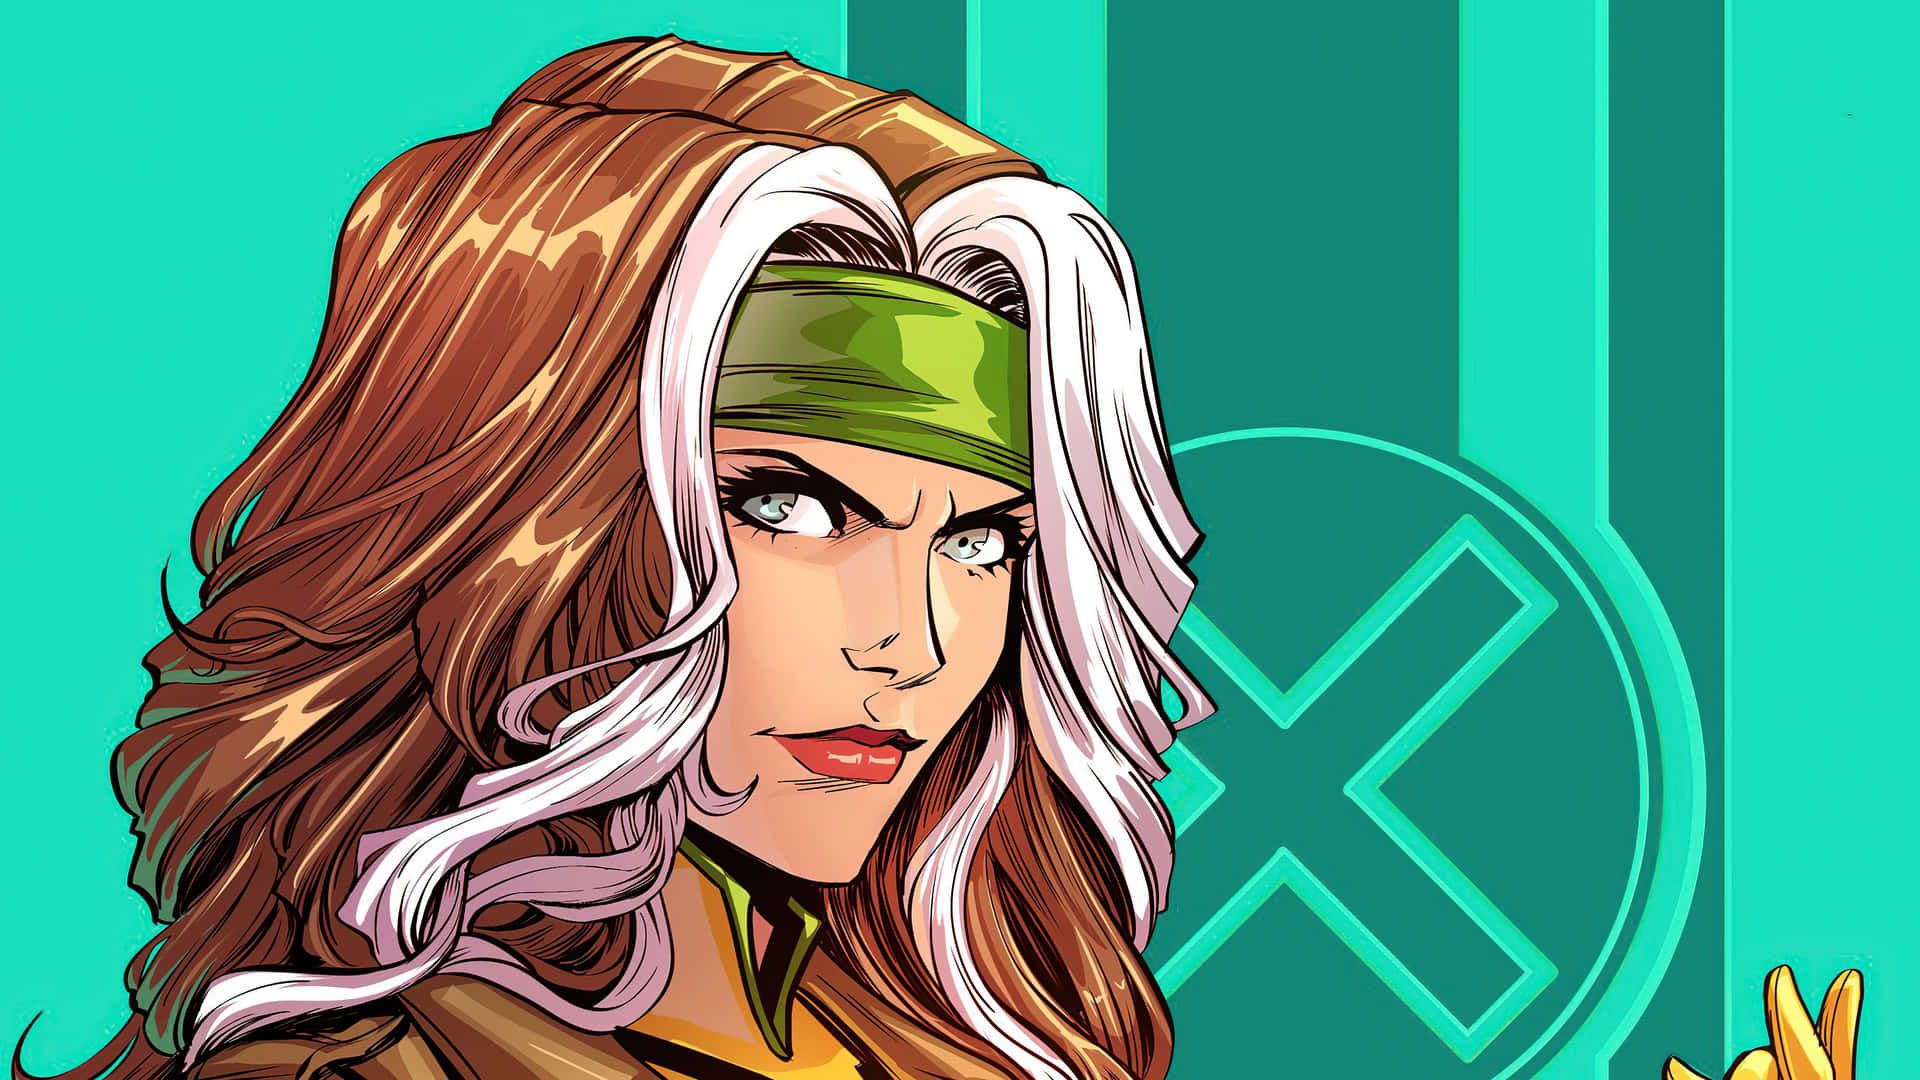 A woman with white and brown hair and a green headband looks to the side. She is wearing a yellow top and has her left hand up in a fist. She is standing in front of a blue background with the X-Men logo on it. - Rogue